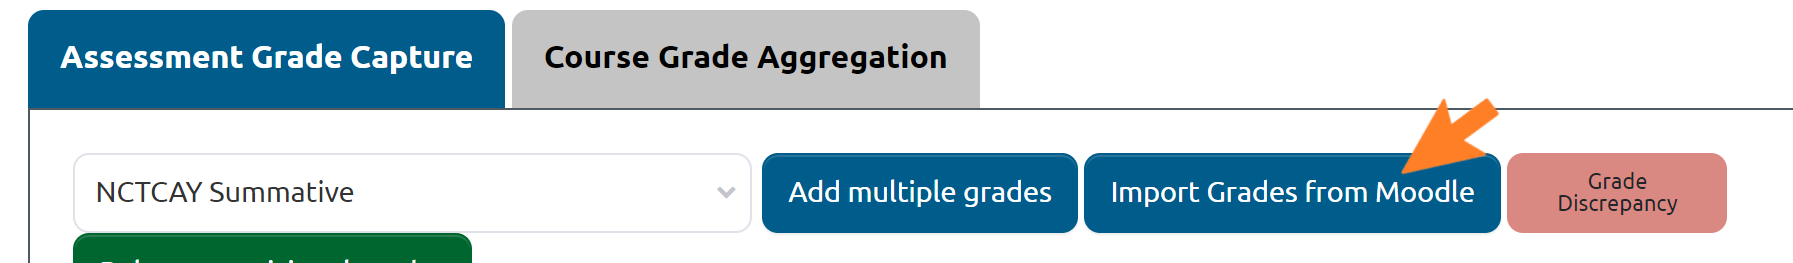 This is an image showing the Grade Capture Tool and the button which is to be clicked to import grades from Moodl